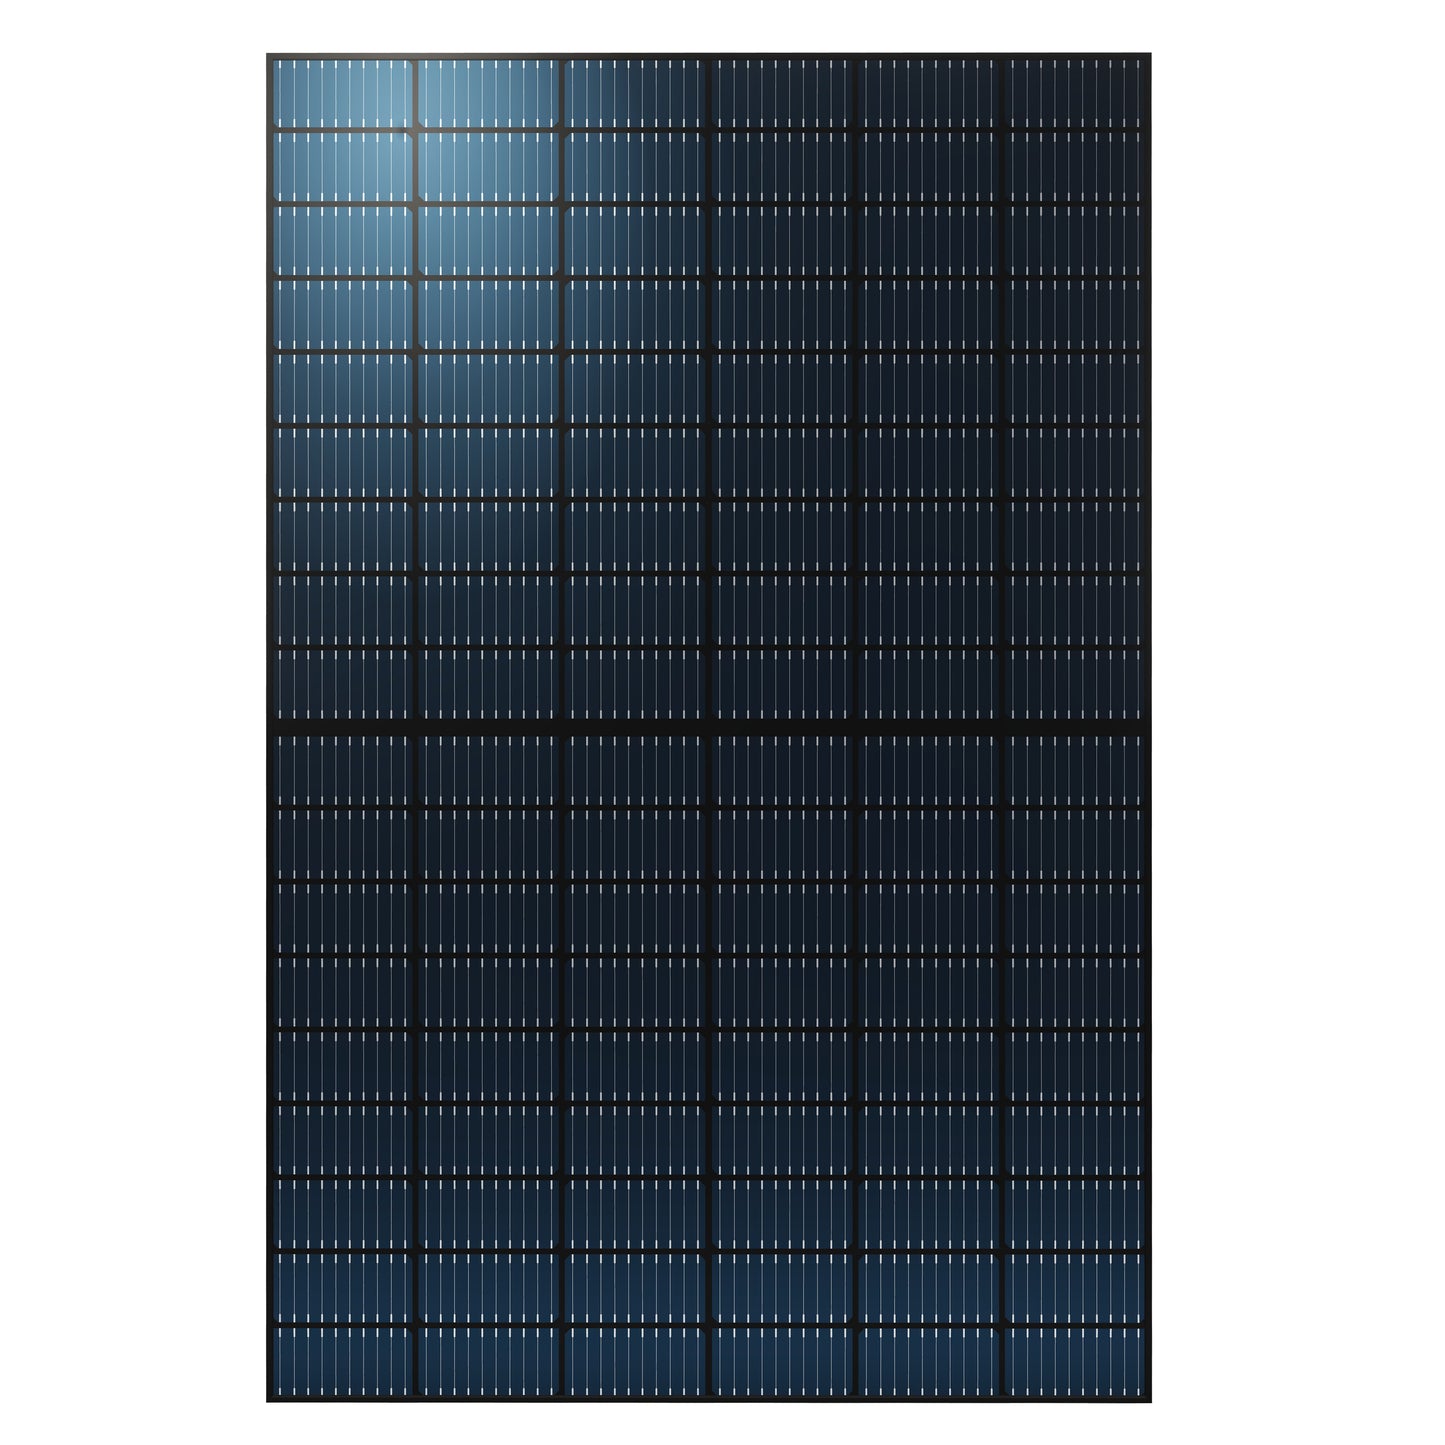 JJN 6pcs 400 Watt Bifacial Solar Panel Kit,10BB Mono Solar Panel 22.3% High Efficiency Solar Module Work with 12/24V Charger for Home Rooftop Power Station Farm Yacht and Other Off-Grid Applications(2400W)